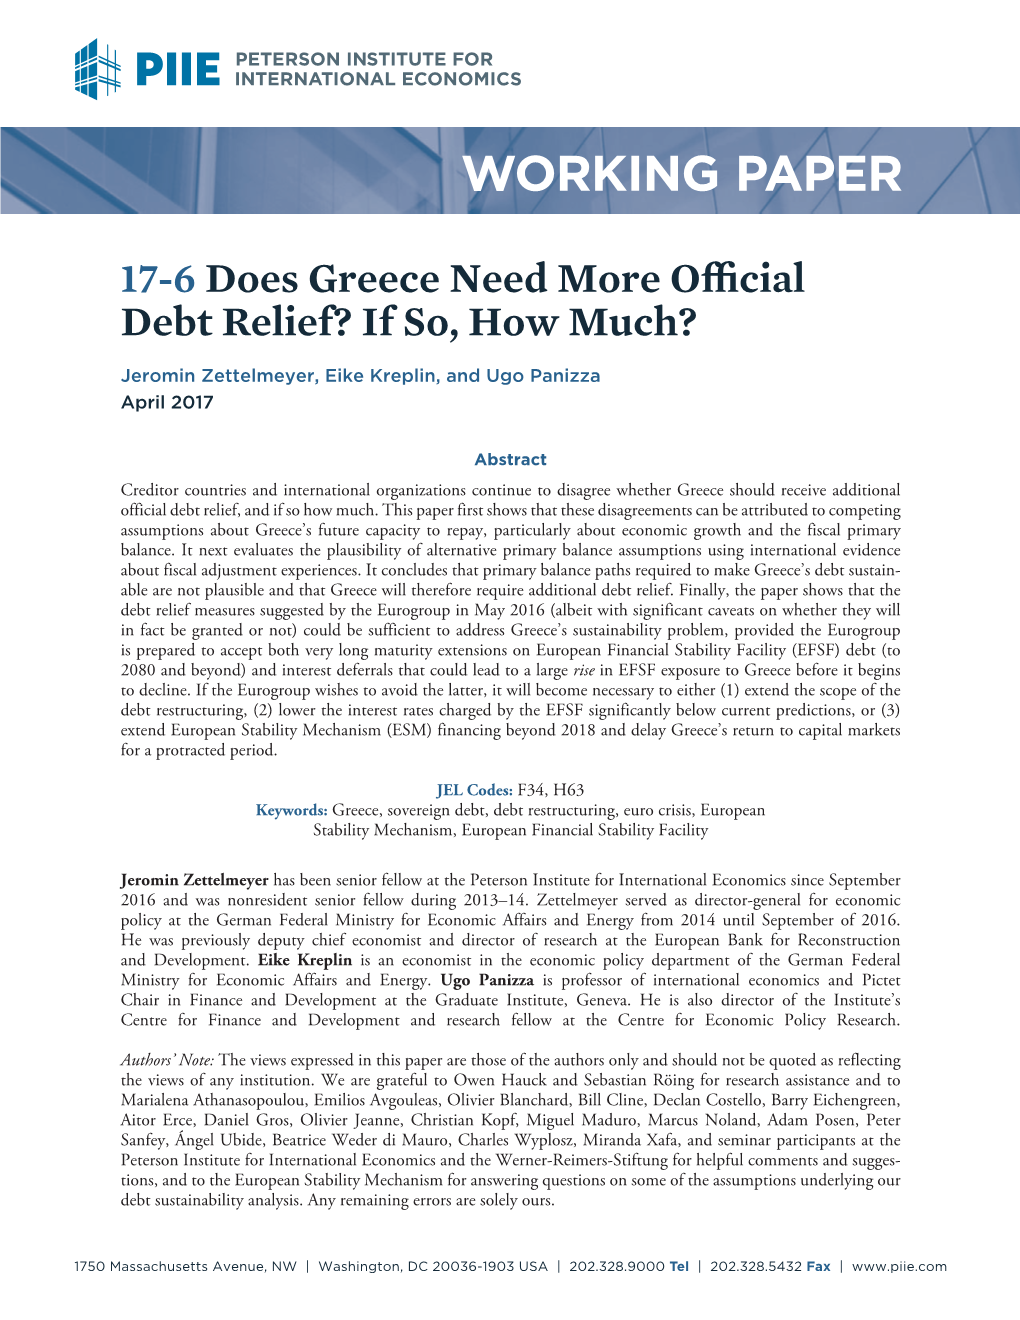 Working Paper 17-6: Does Greece Need More Official Debt Relief?